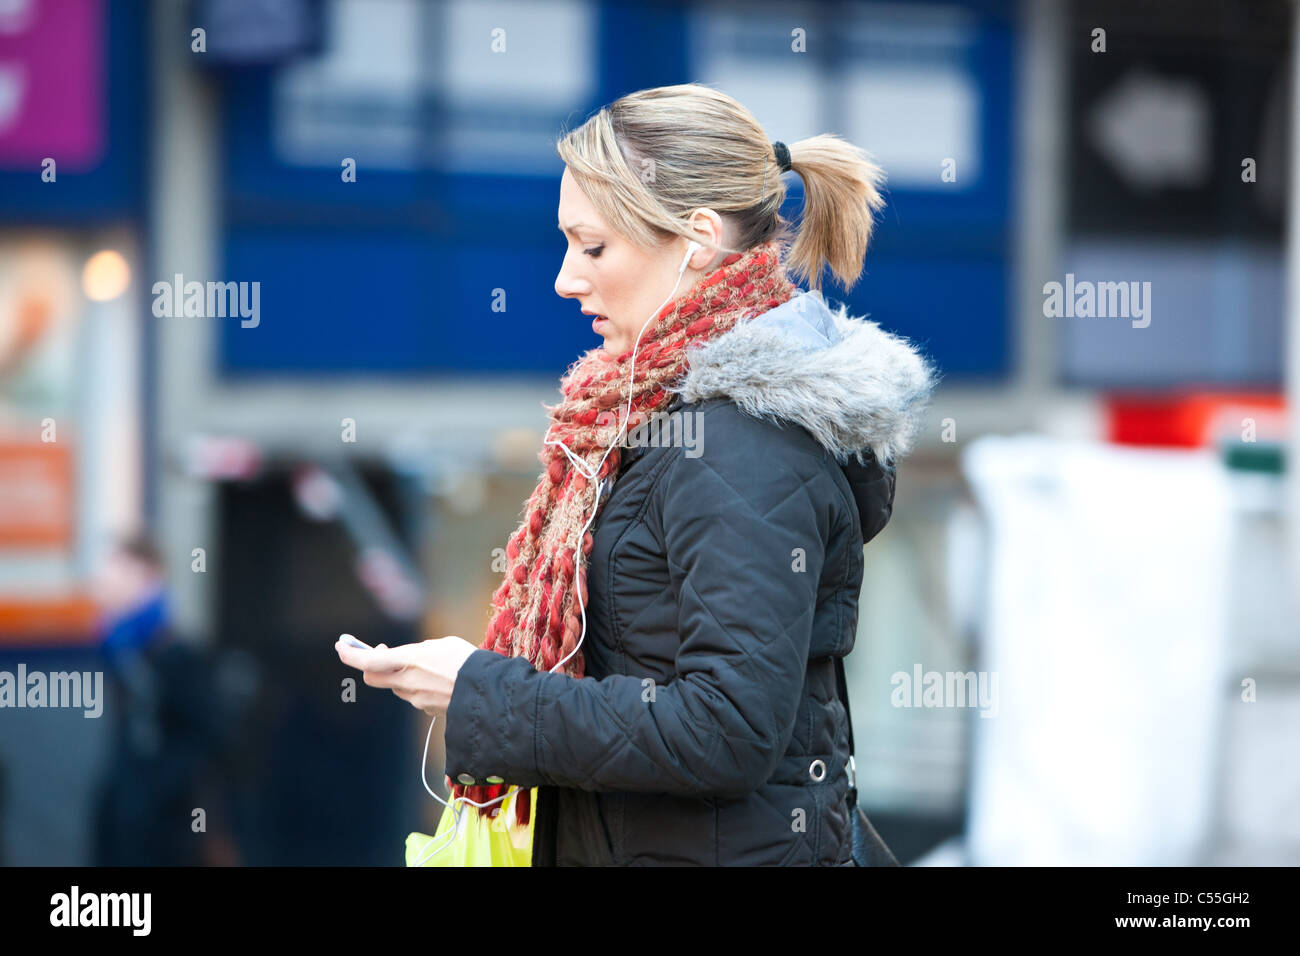 woman walking listening to music on mp3 player Stock Photo